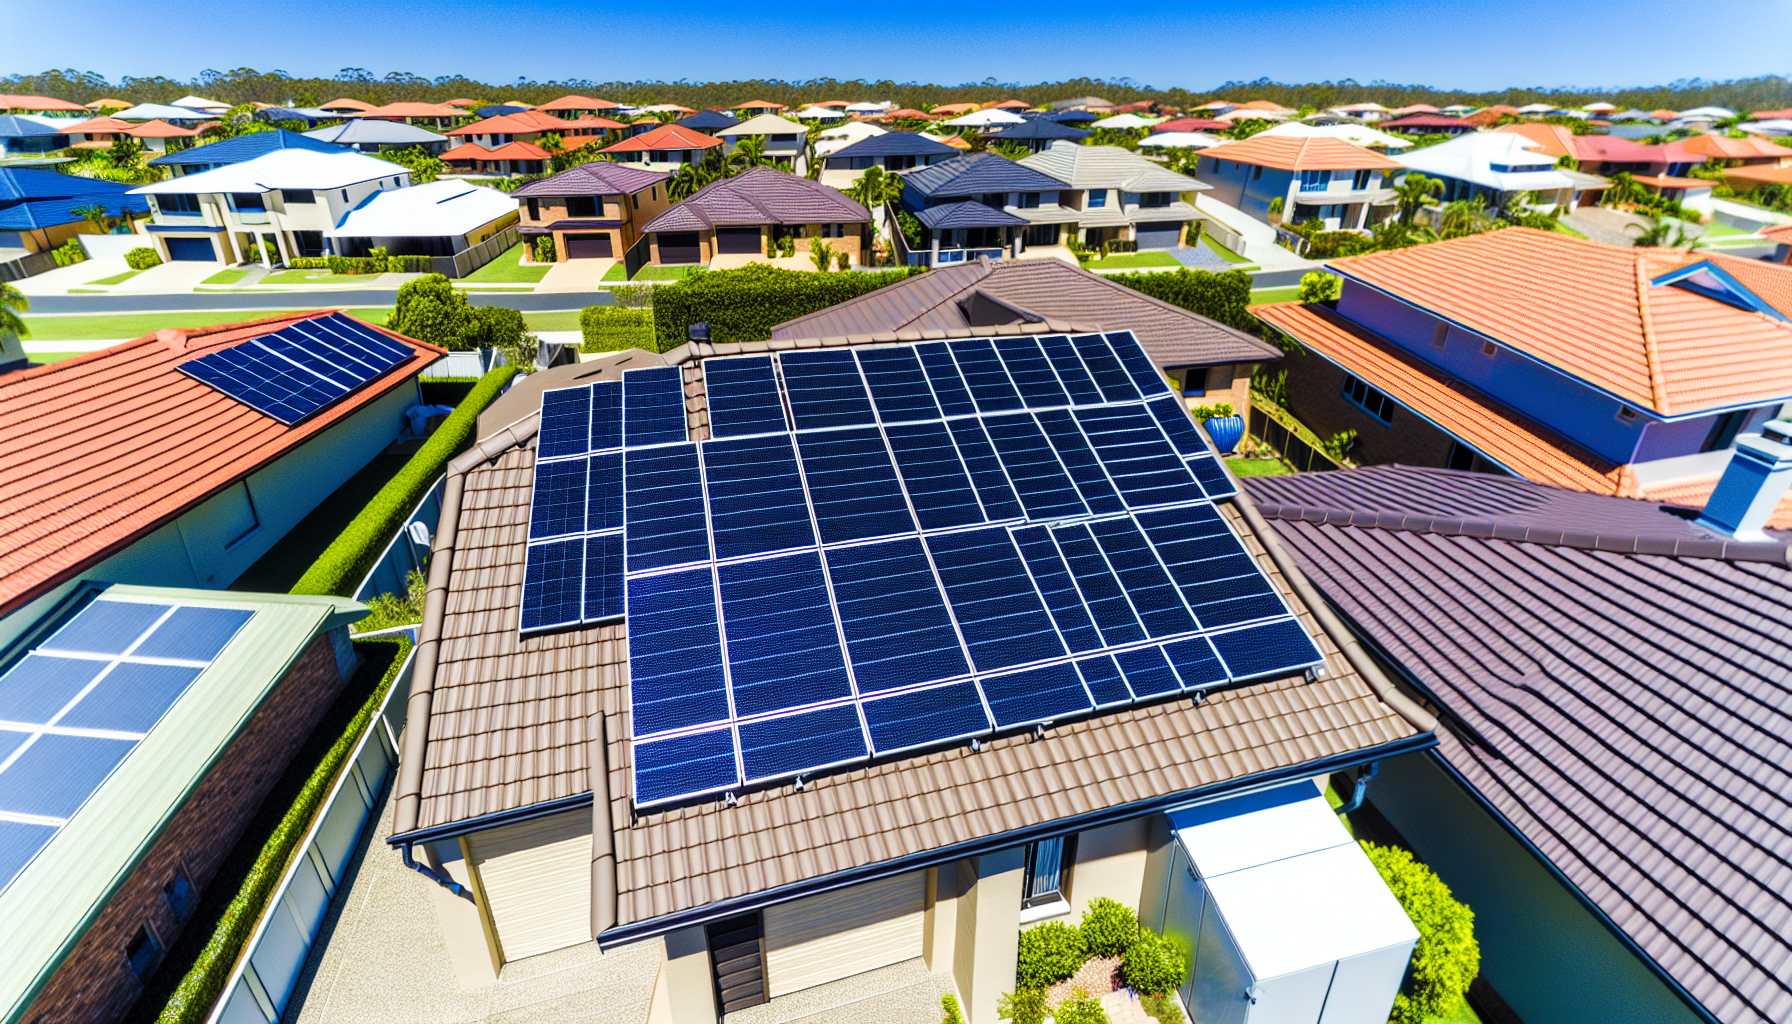 Solar panels on a rooftop in the Gold Coast region